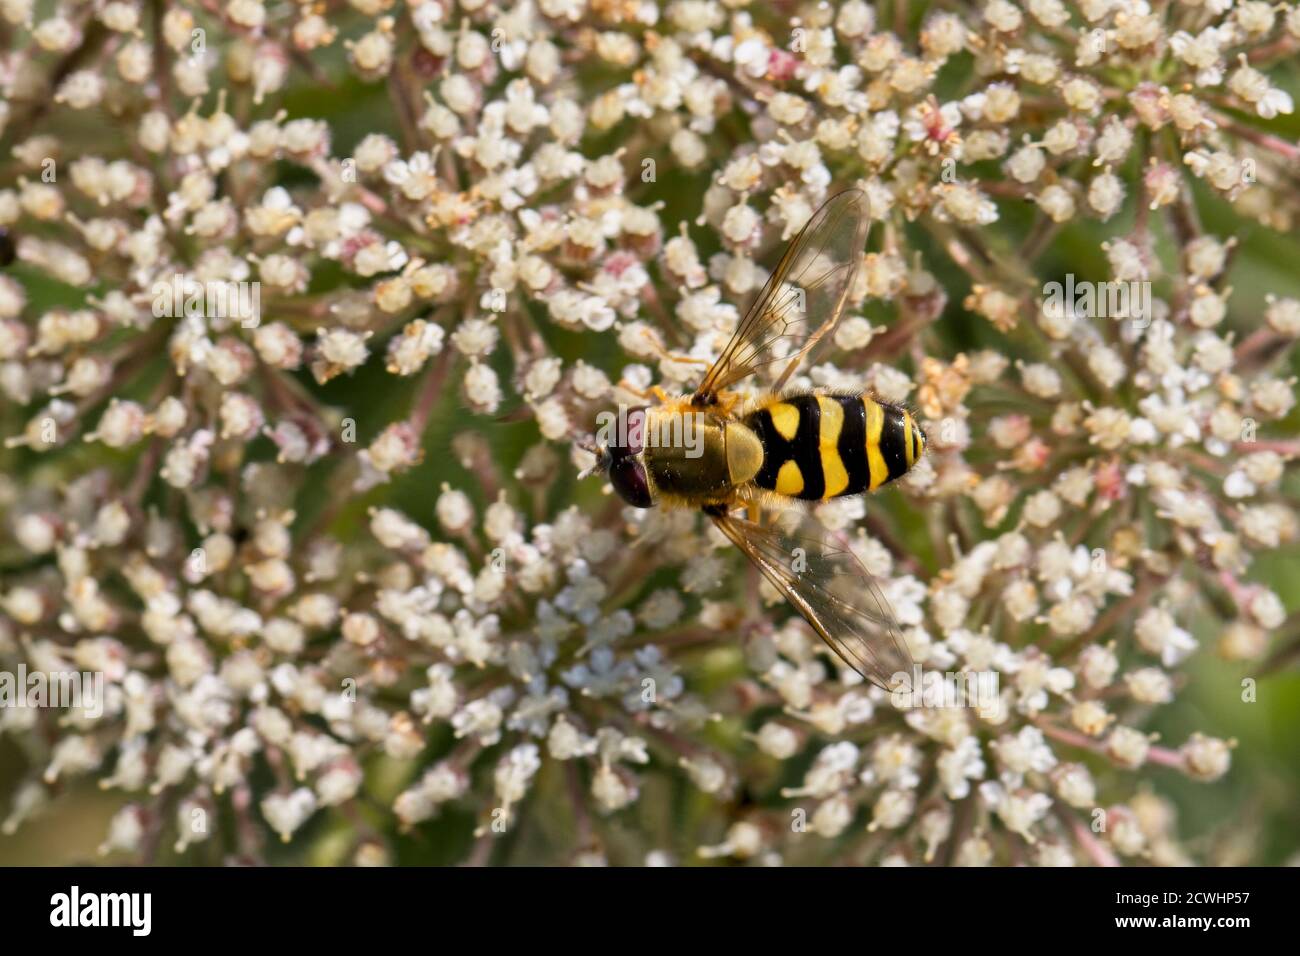 Hoverfly species on a flowerhead, Cornwall, England, UK. Stock Photo